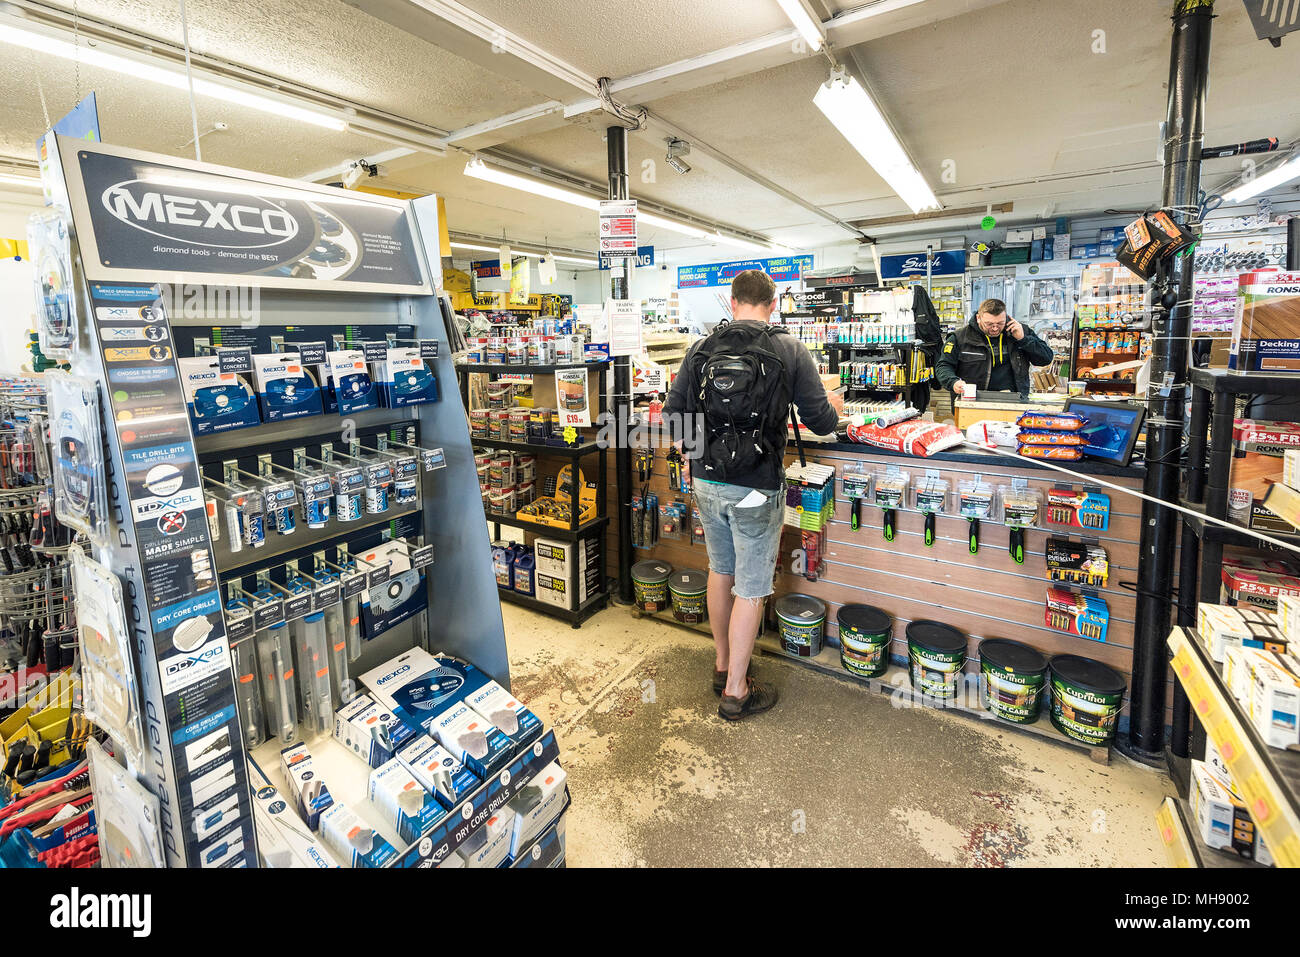 Independent Diy Store High Resolution Stock Photography and Images - Alamy